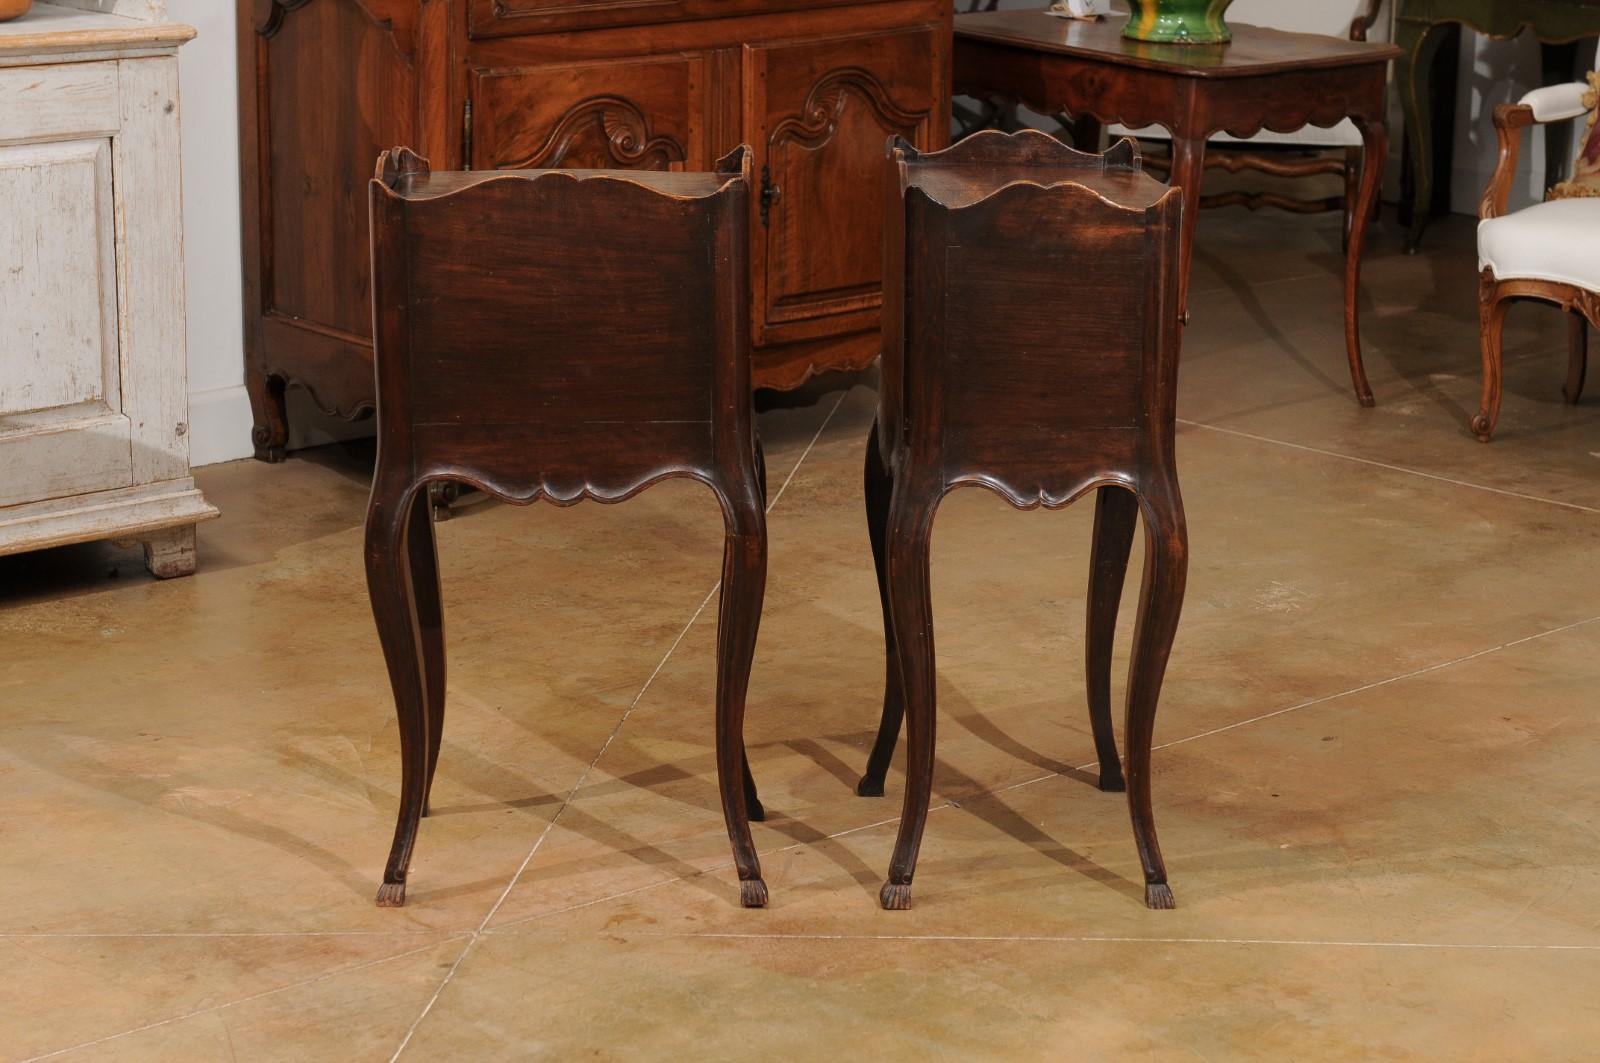 Pair of 19th Century French Carved Walnut Bedside Tables with Doors and Drawers 6